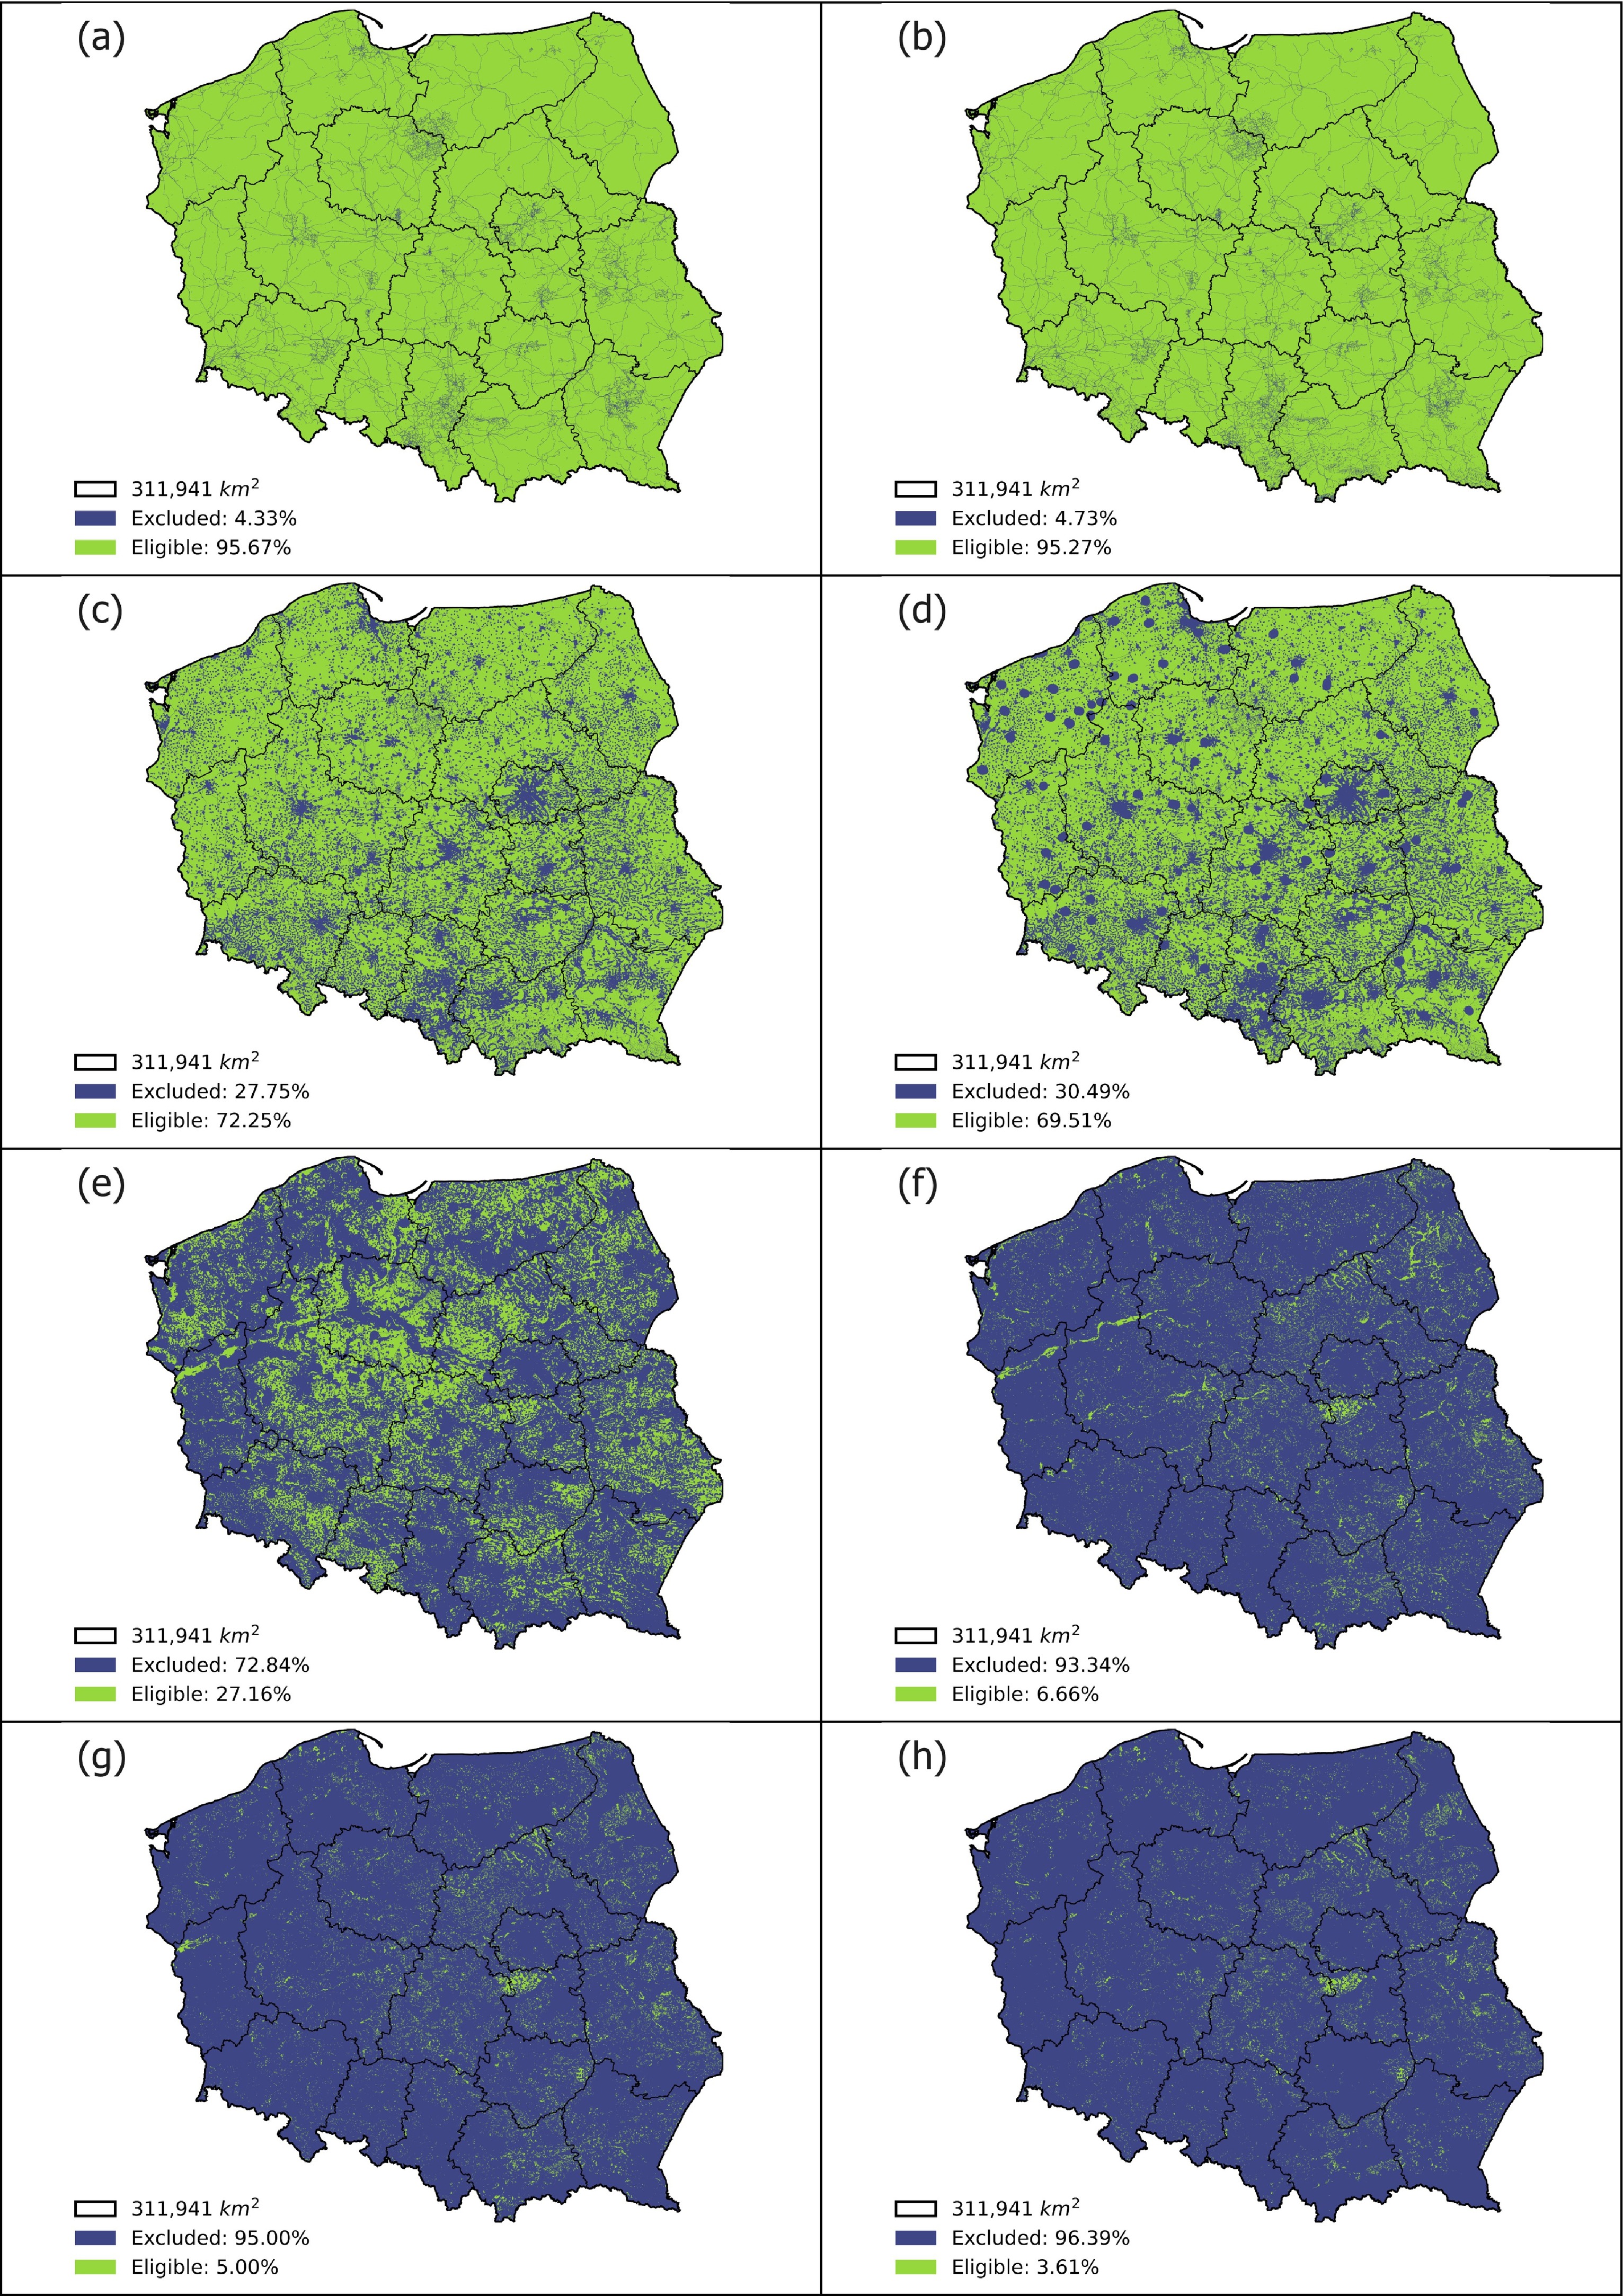 A GIS-based method for assessing the economics of utility-scale photovoltaic systems